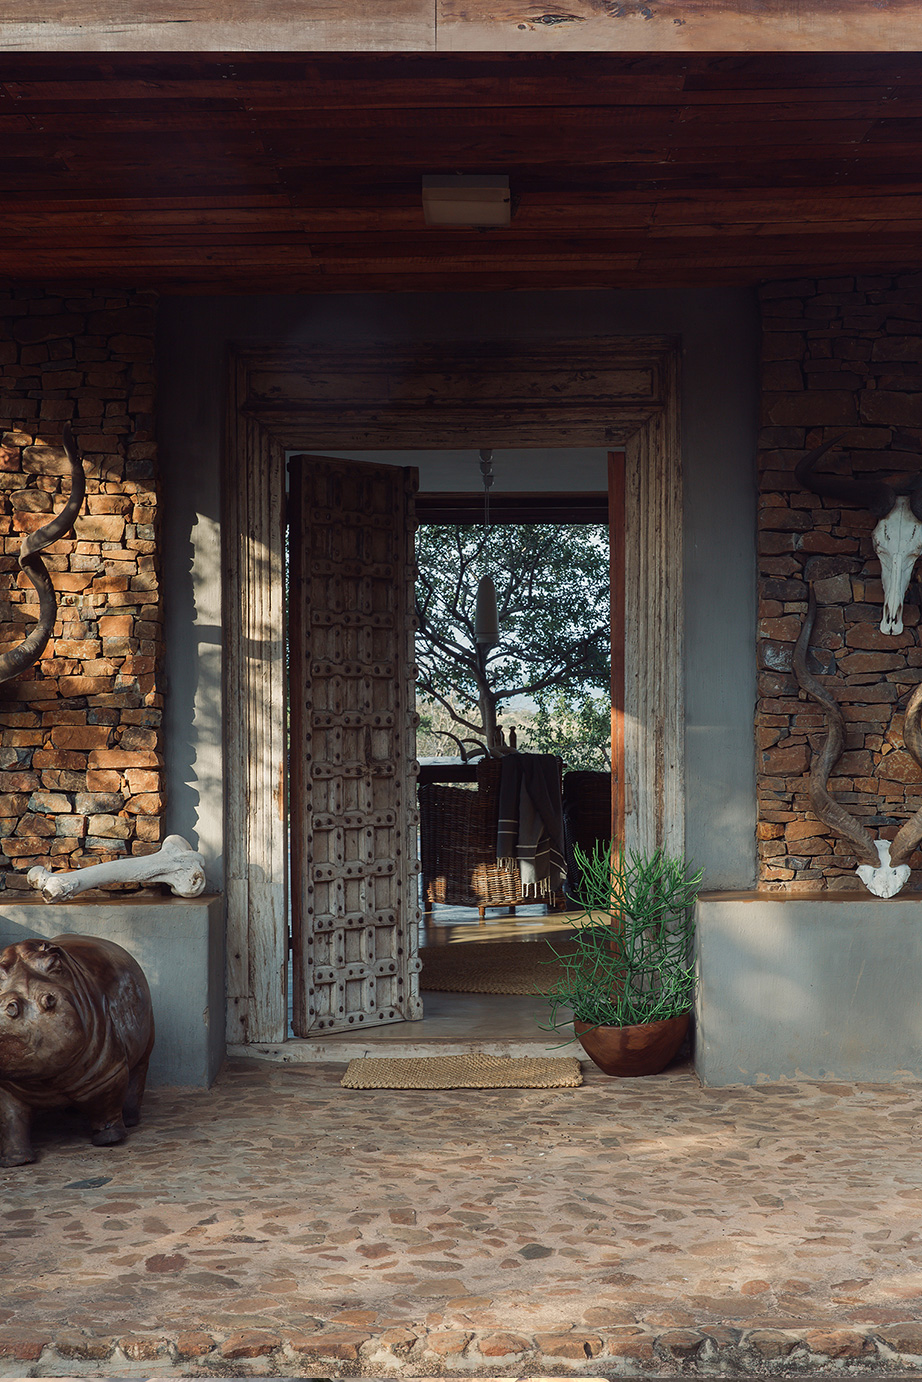 Perfect Hideaways, South Africa, Manyoni Private Game Reserve, Thuleni Homestead